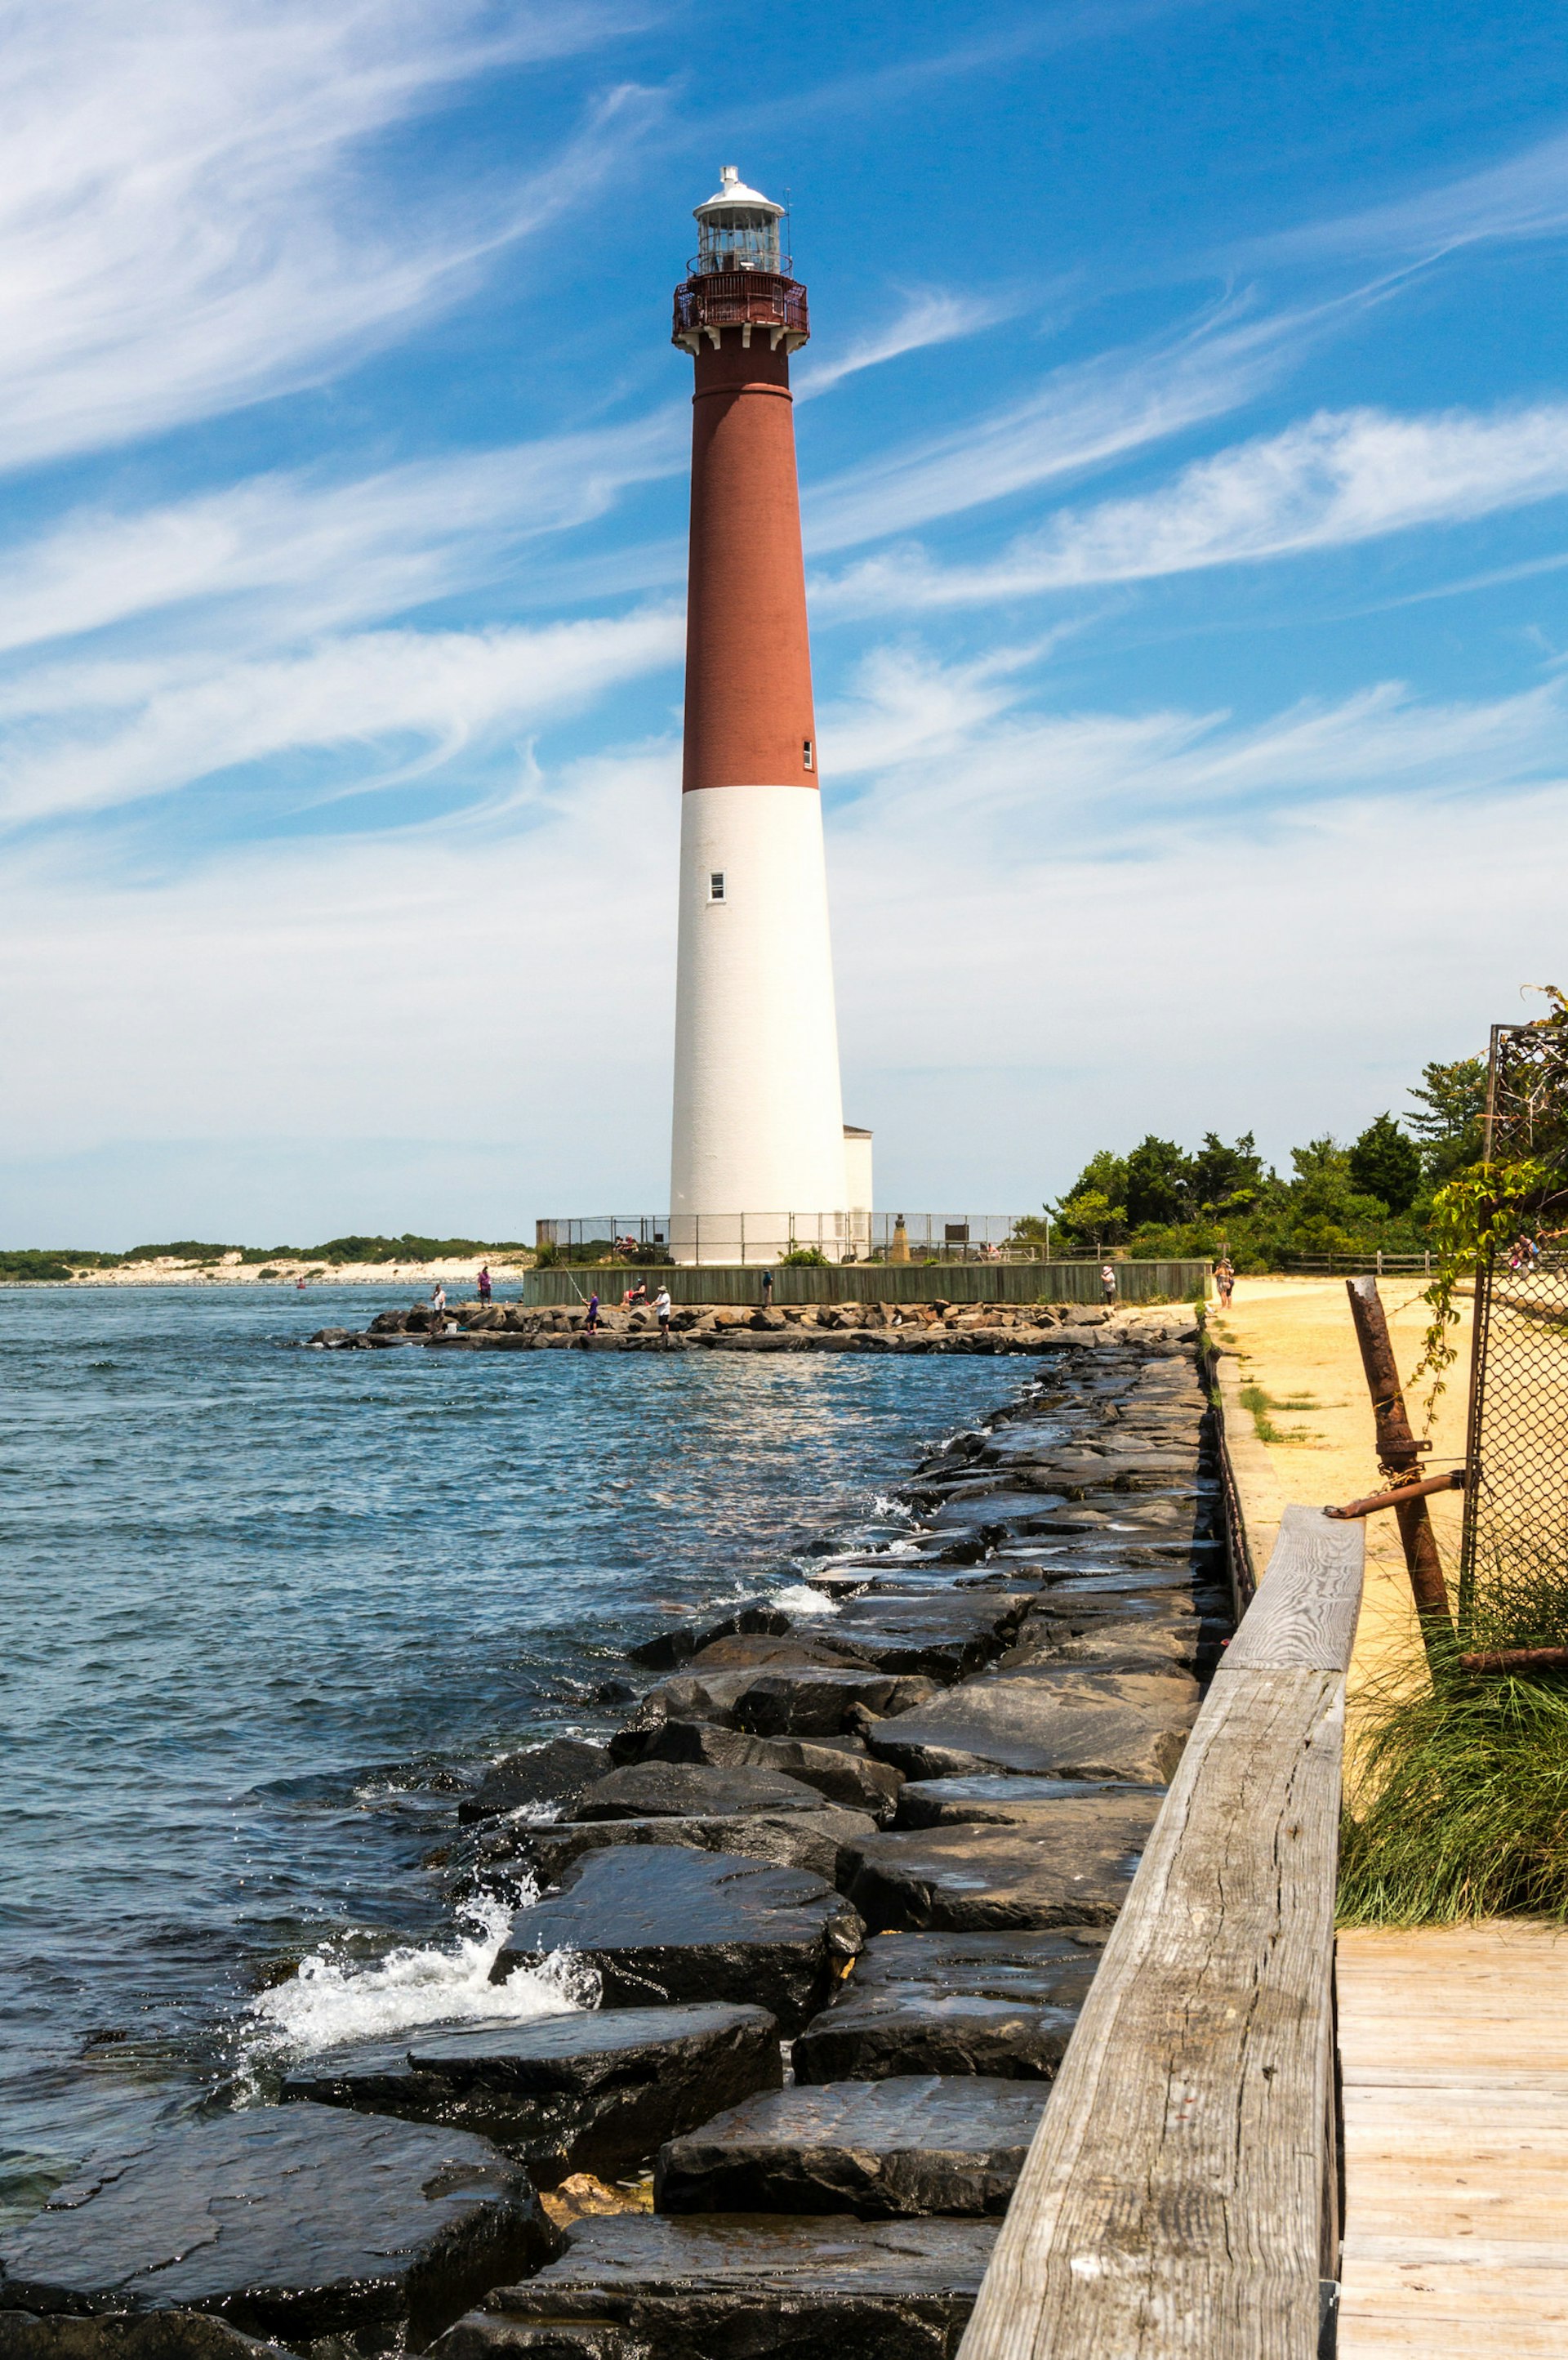 Tall red-and-white lighthouse standing on the shore